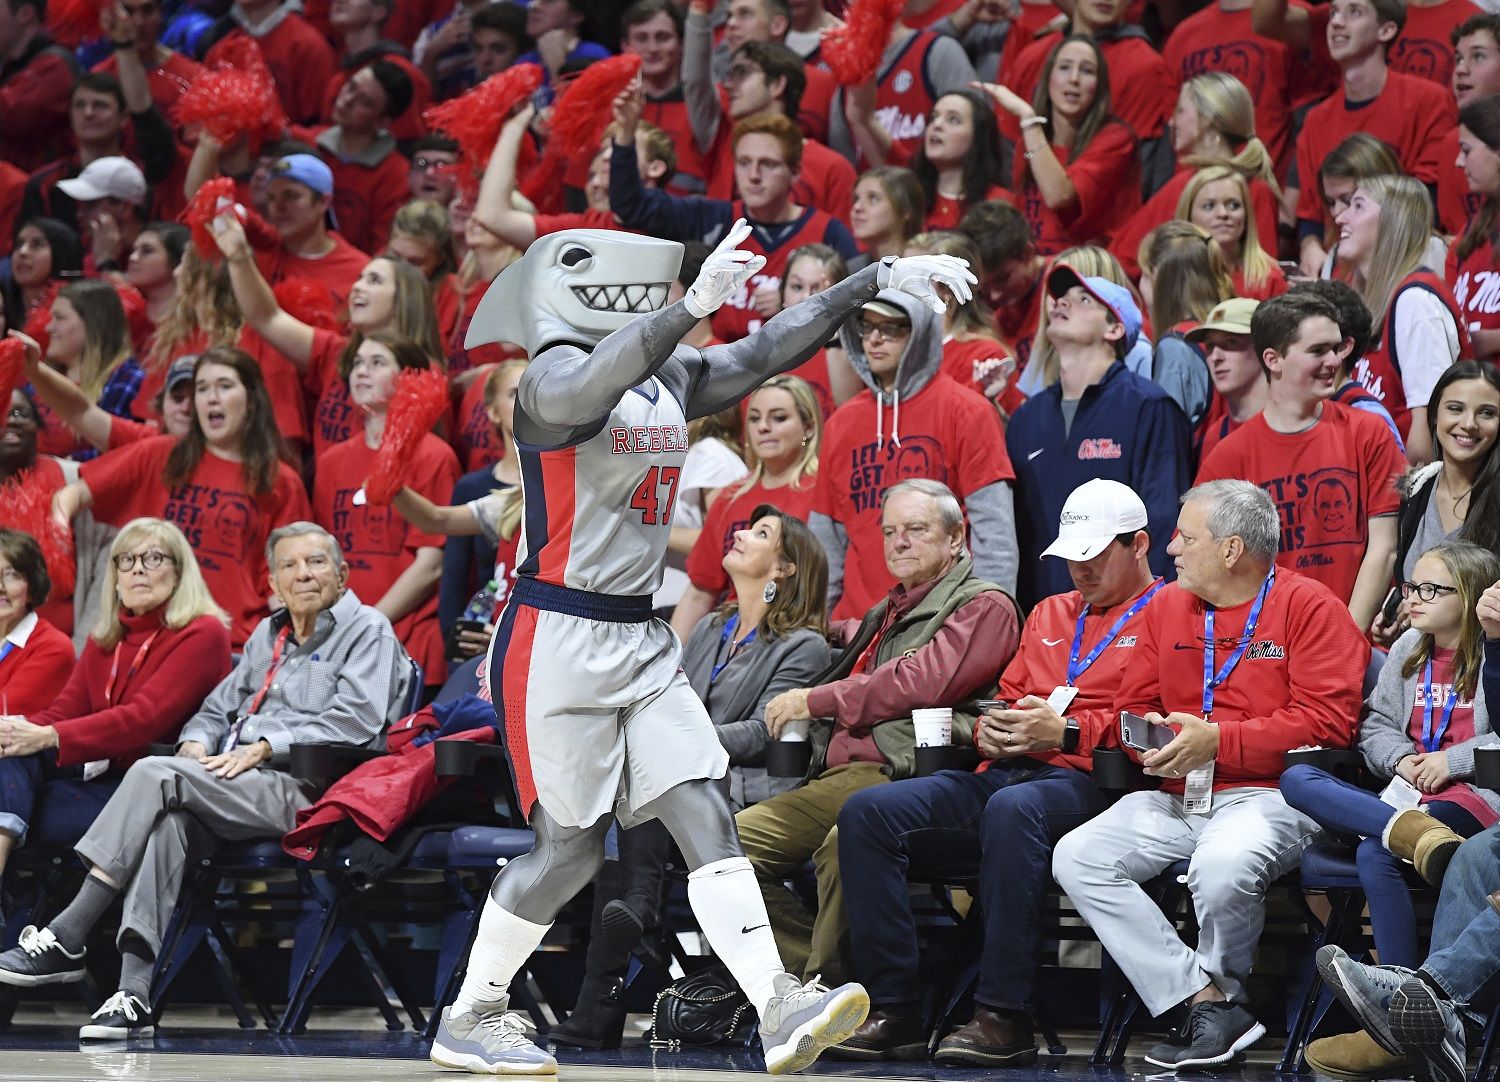 Mississippi mascot Landshark Tony gestures to the crowd during the first half of an NCAA college basketball game between Mississippi and LSU in Oxford, Miss., Tuesday, Jan. 15, 2019. (AP Photo/Thomas Graning)